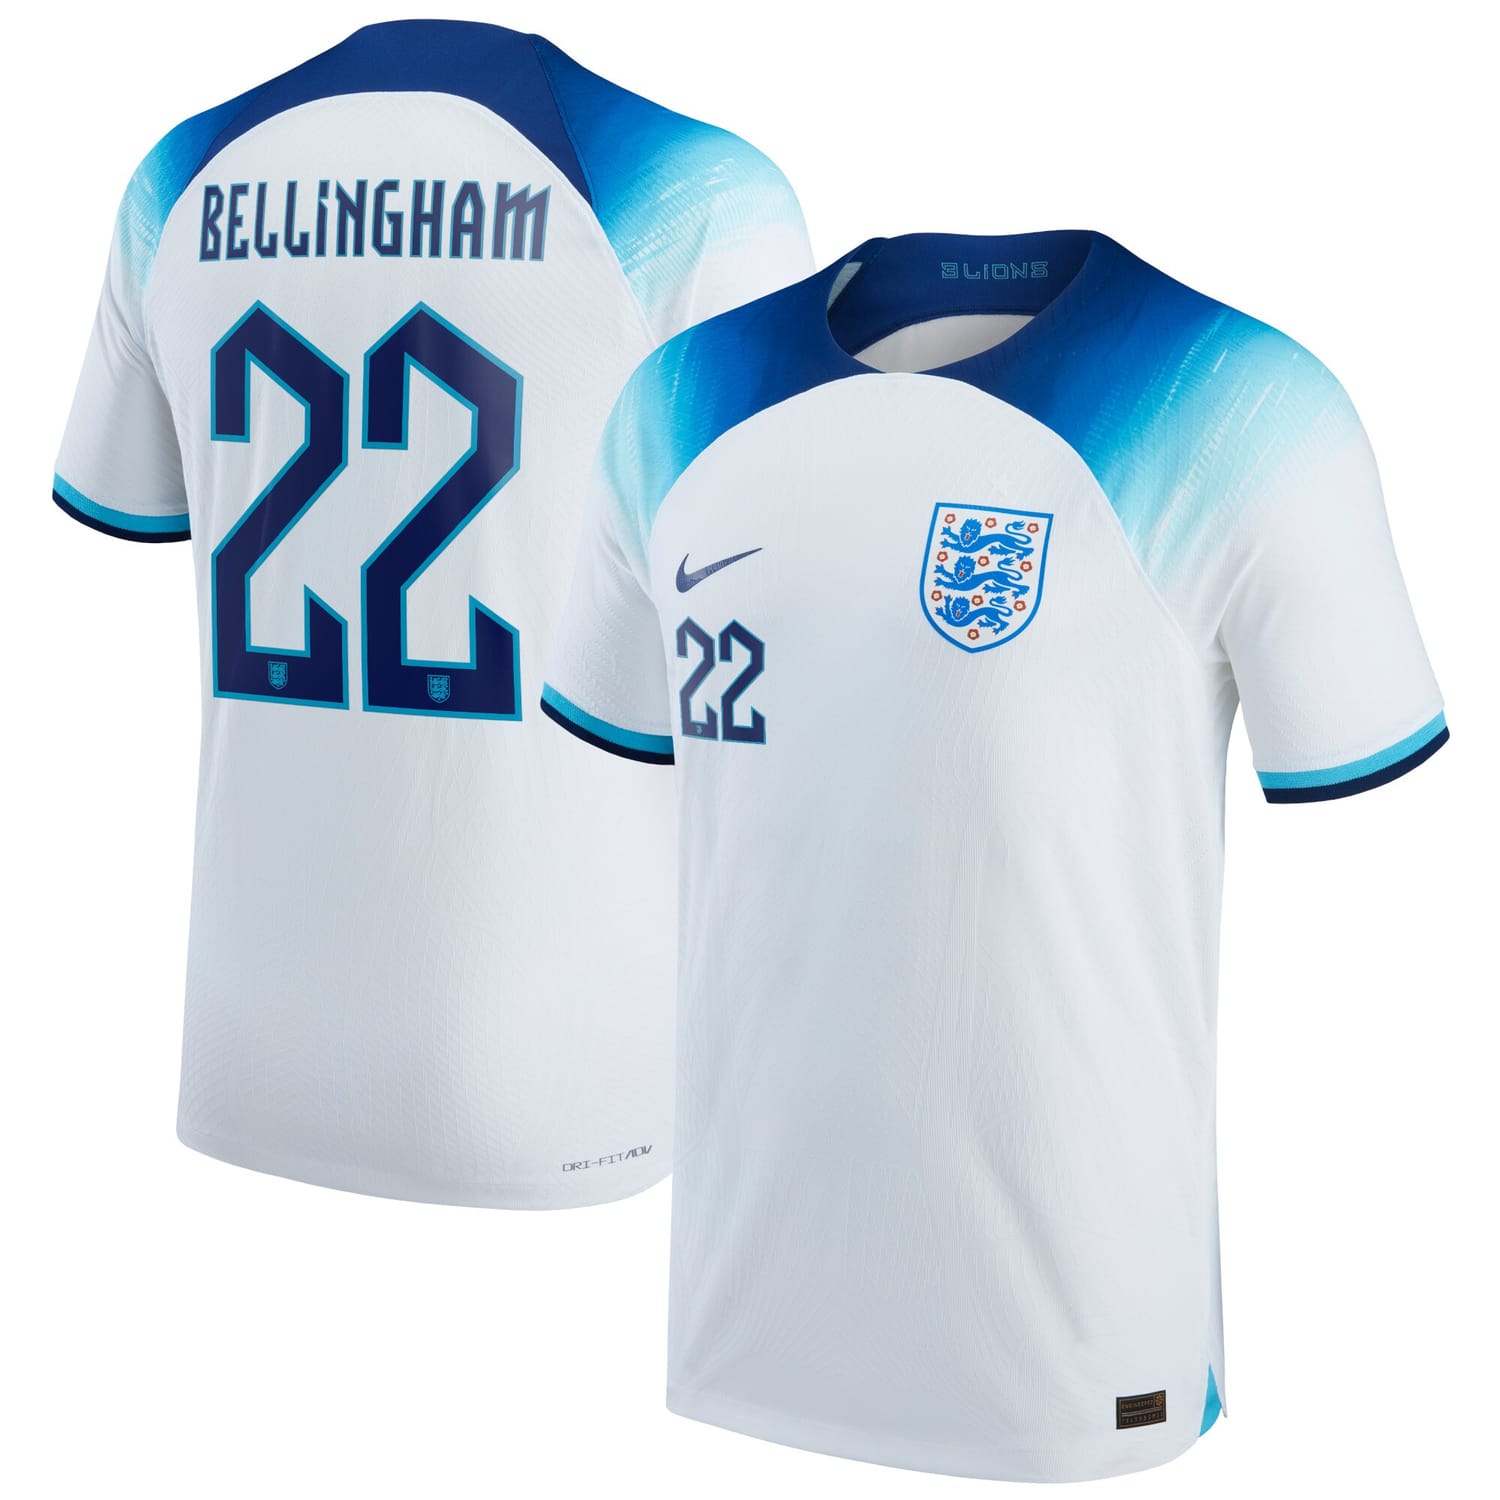 England National Team Home Authentic Jersey Shirt 2022 player Jude Bellingham 22 printing for Men